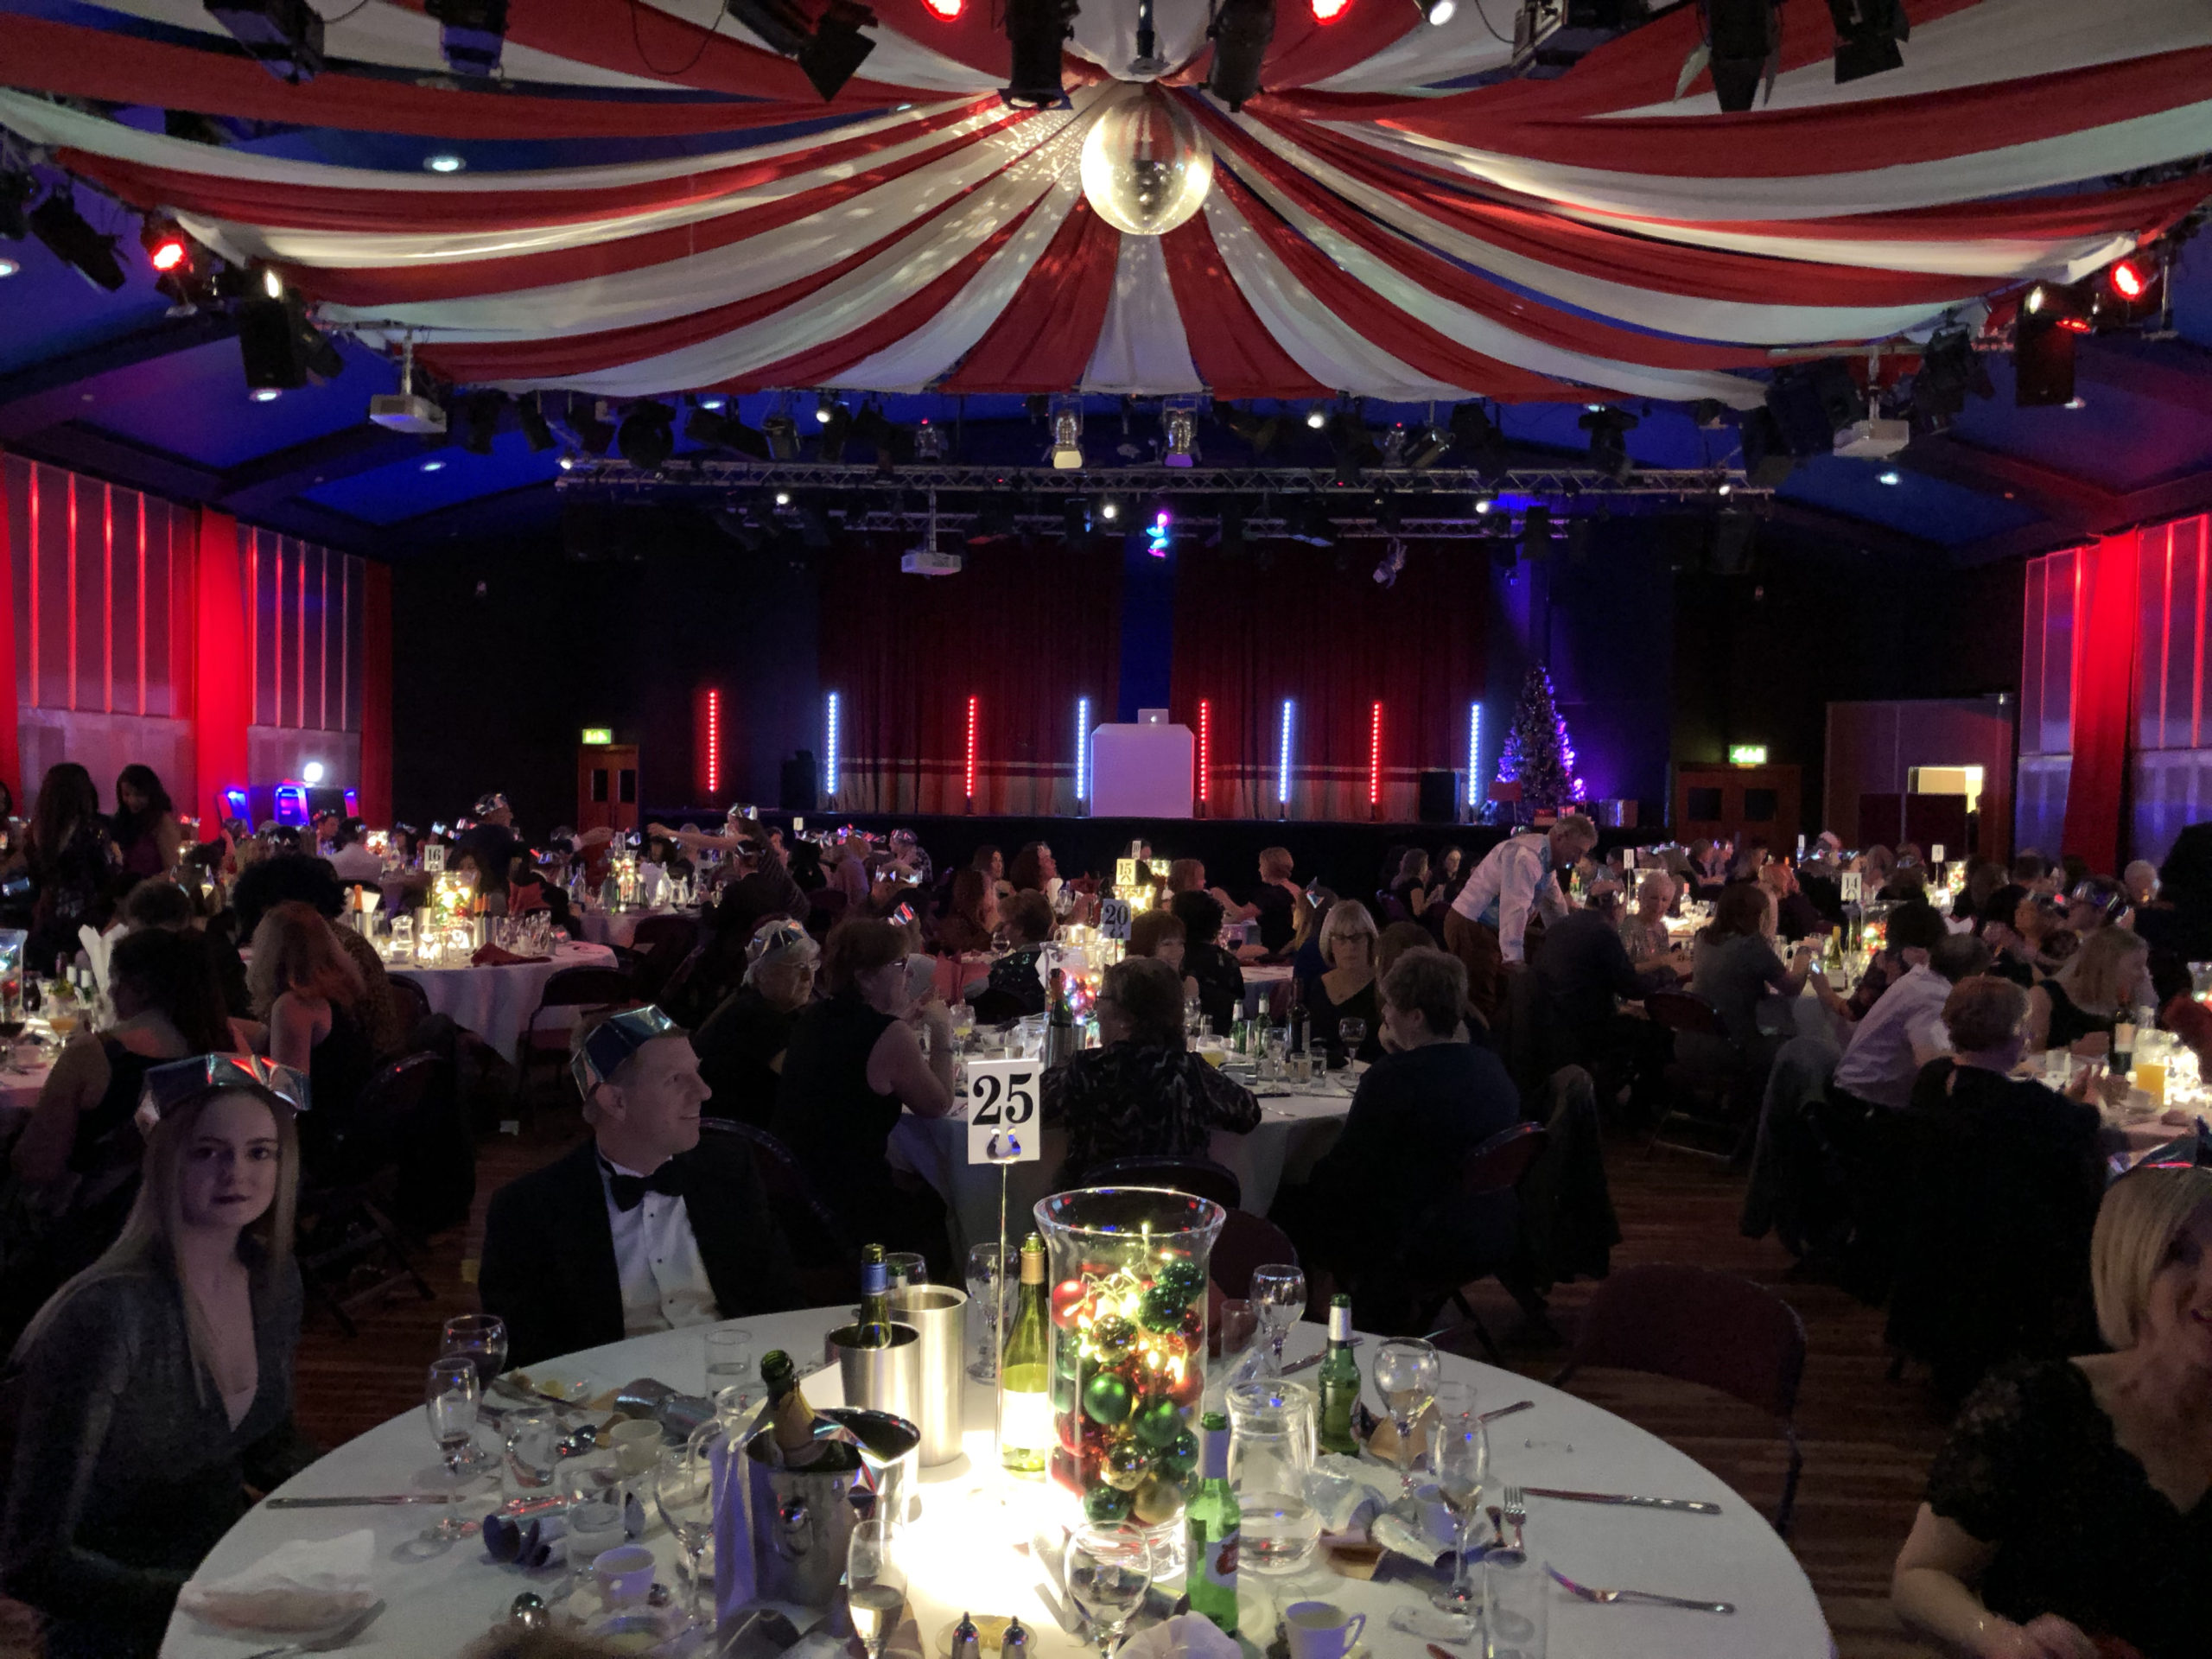 Circus Themed Event, HG Wells Conference Centre, Surrey